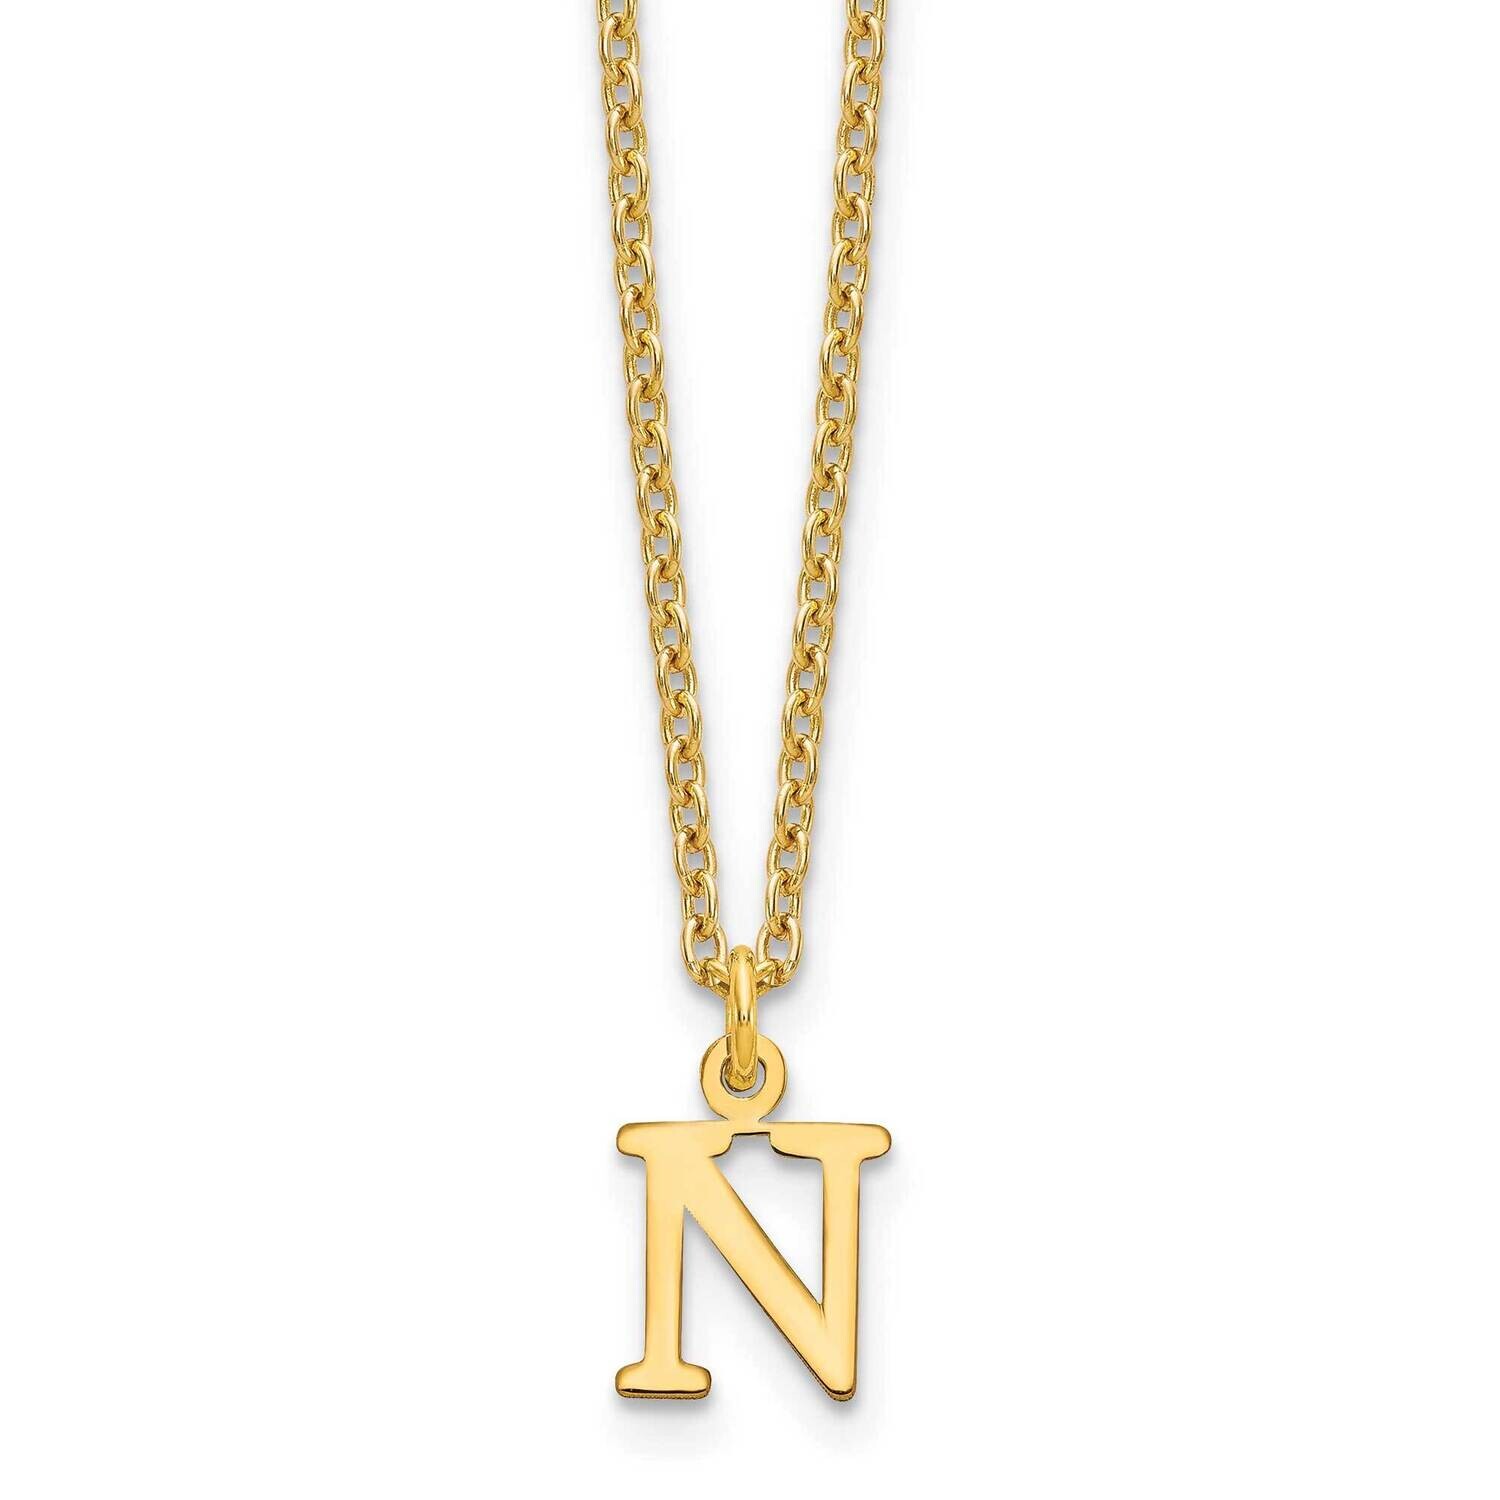 Gold-Plated Cutout Letter N Initial Necklace Sterling Silver XNA727GP/N